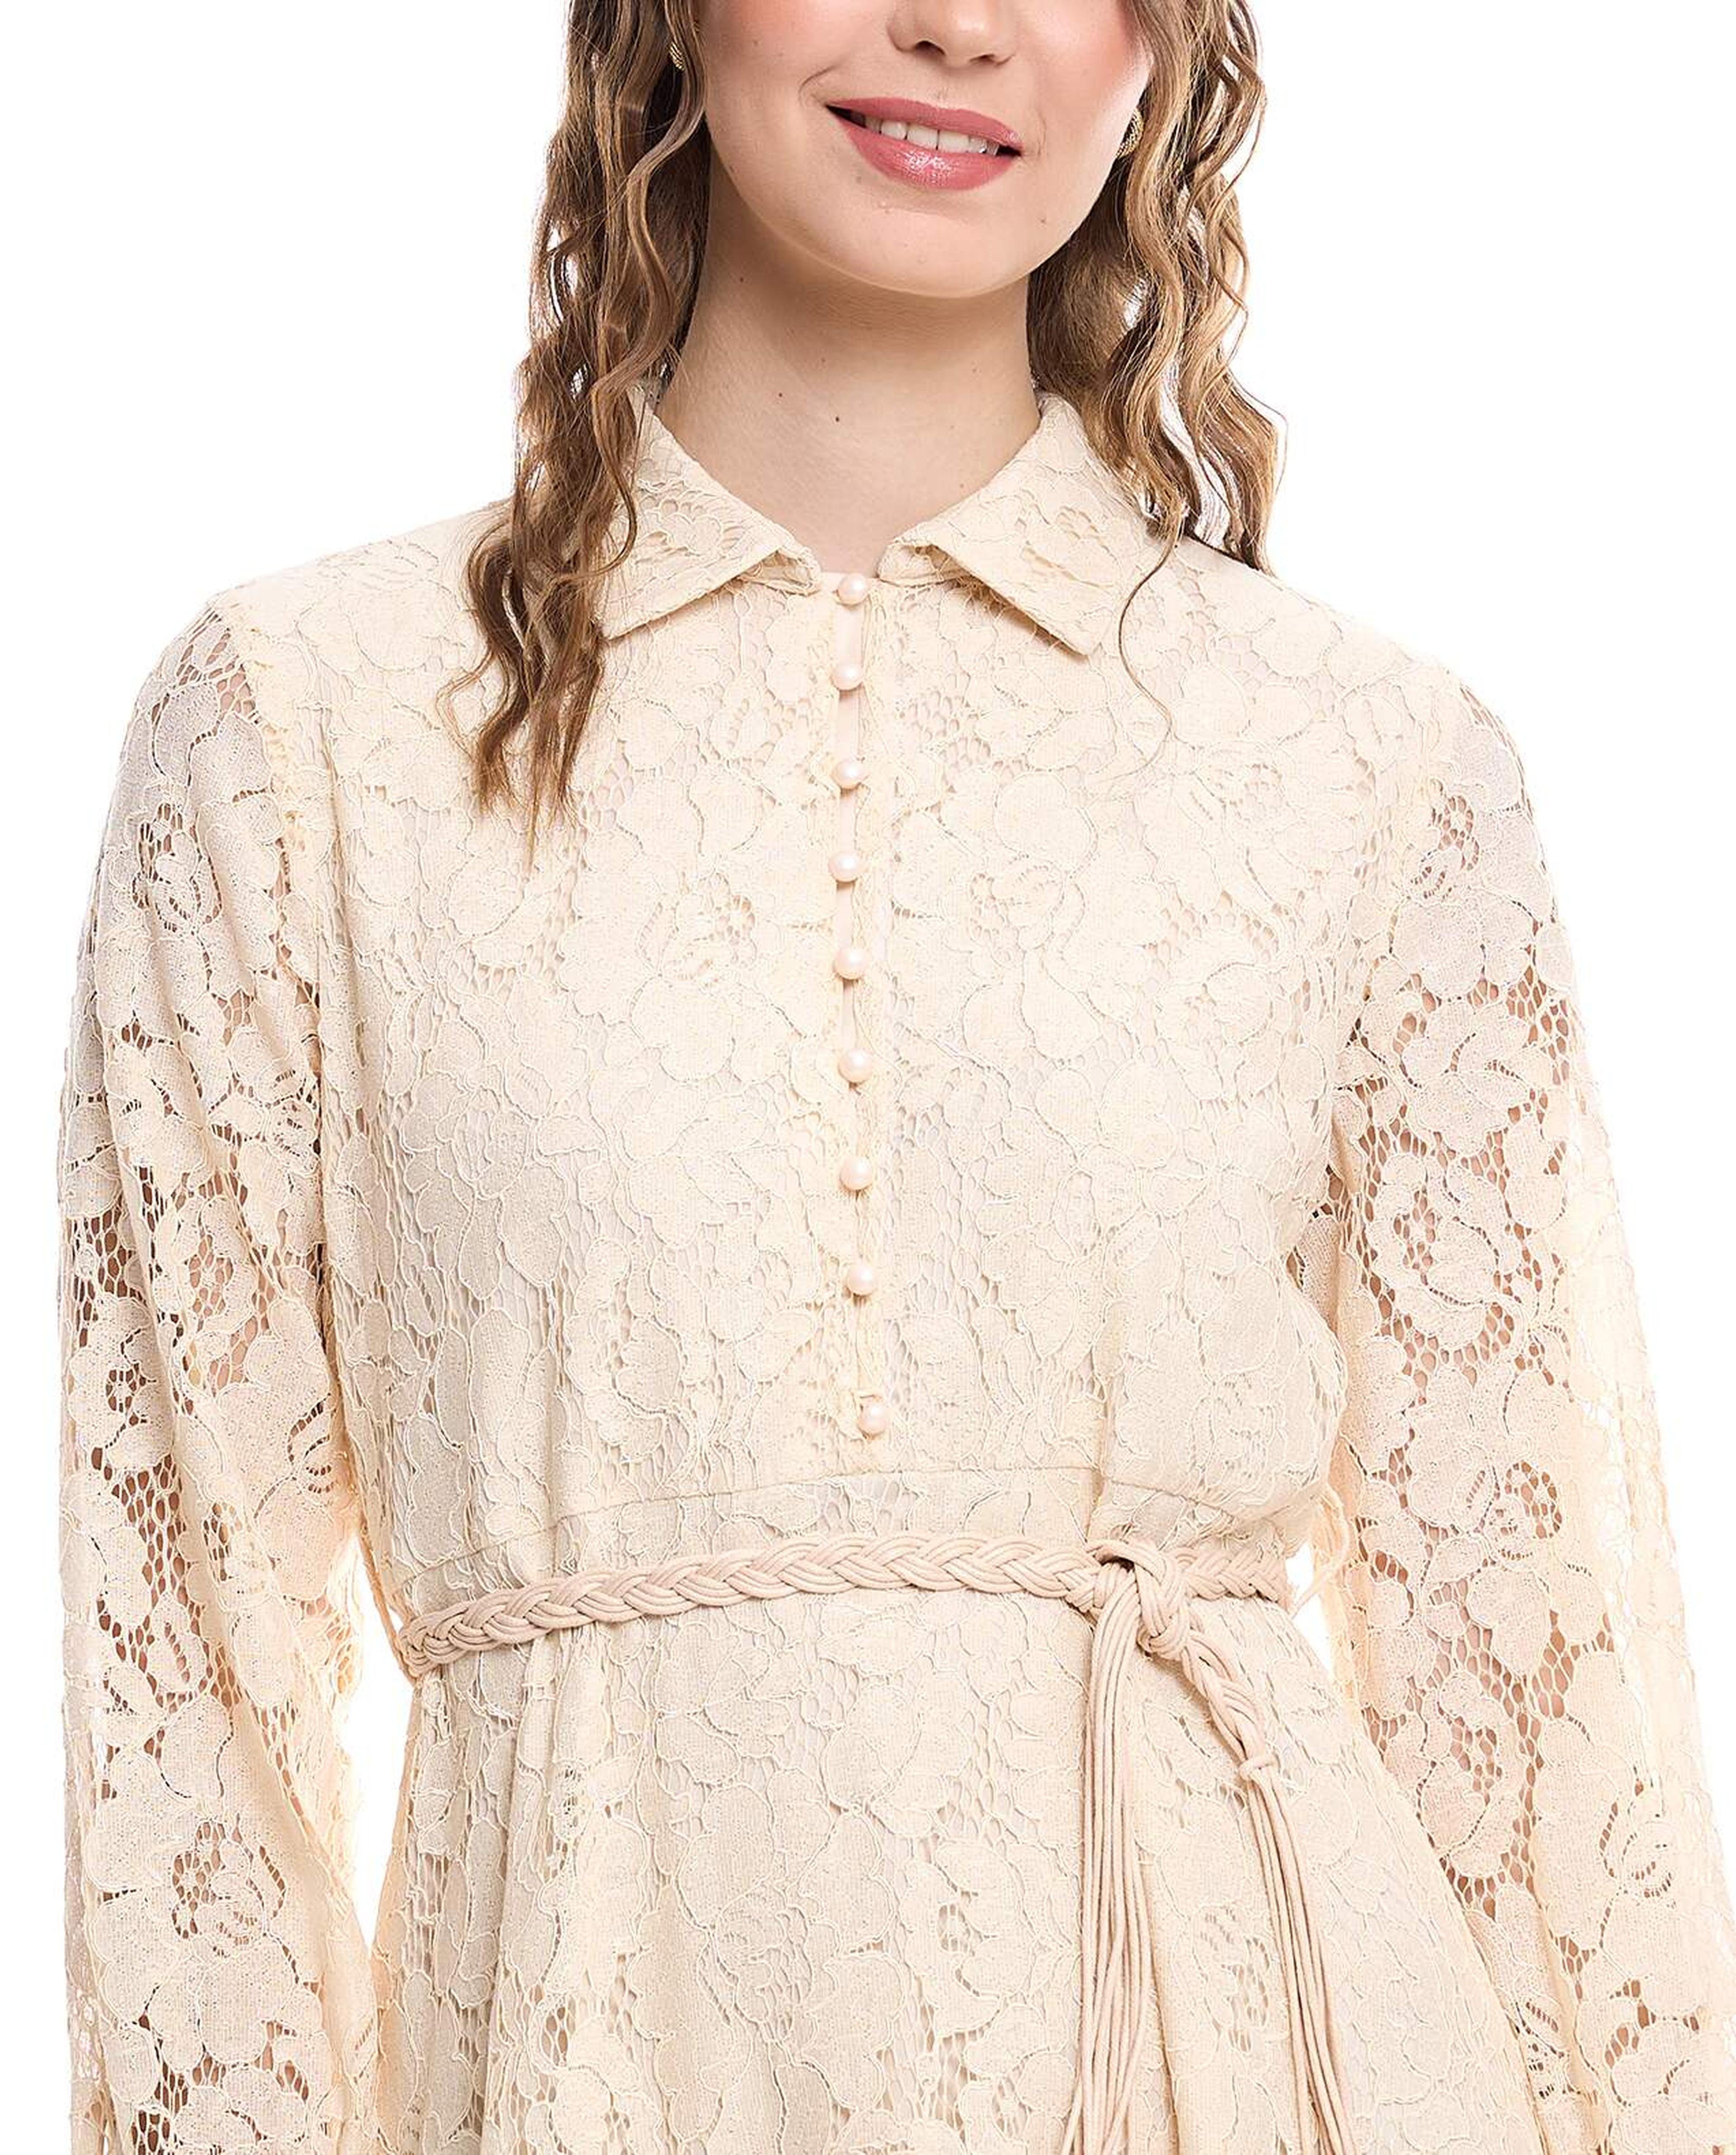 Lace Shirt Dress with Long Sleeves